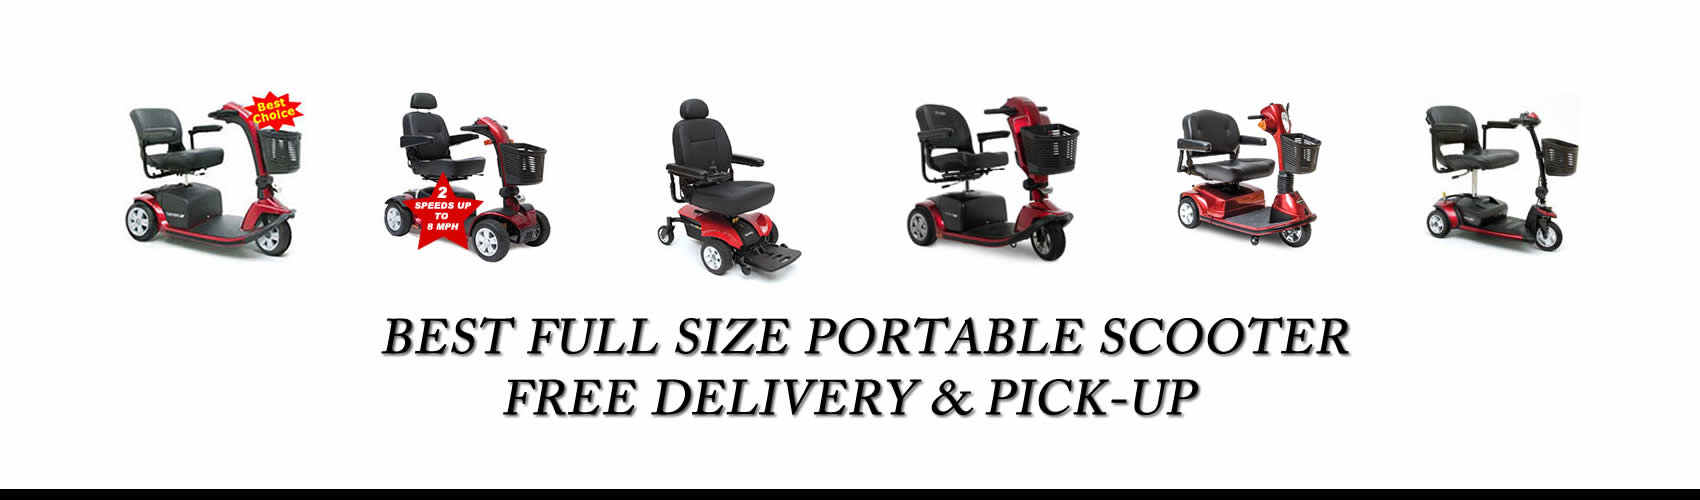 Wheelchair for Rent, Scooters for Rent, Las Vegas, NV